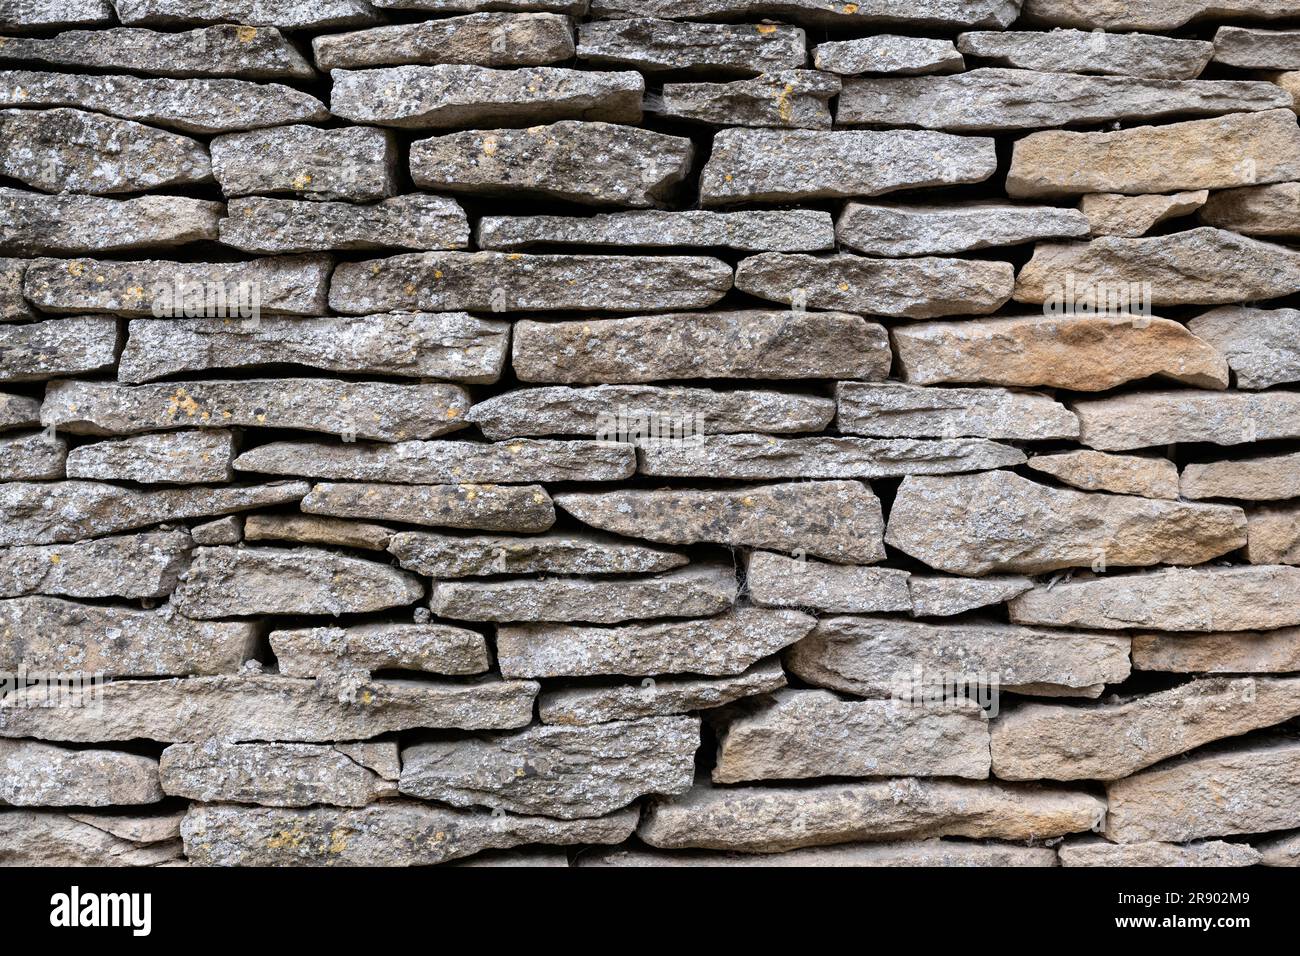 Stone slabs piled up to form a wall, Cotswolds, Gloucestershire, England, Great Britain Stock Photo